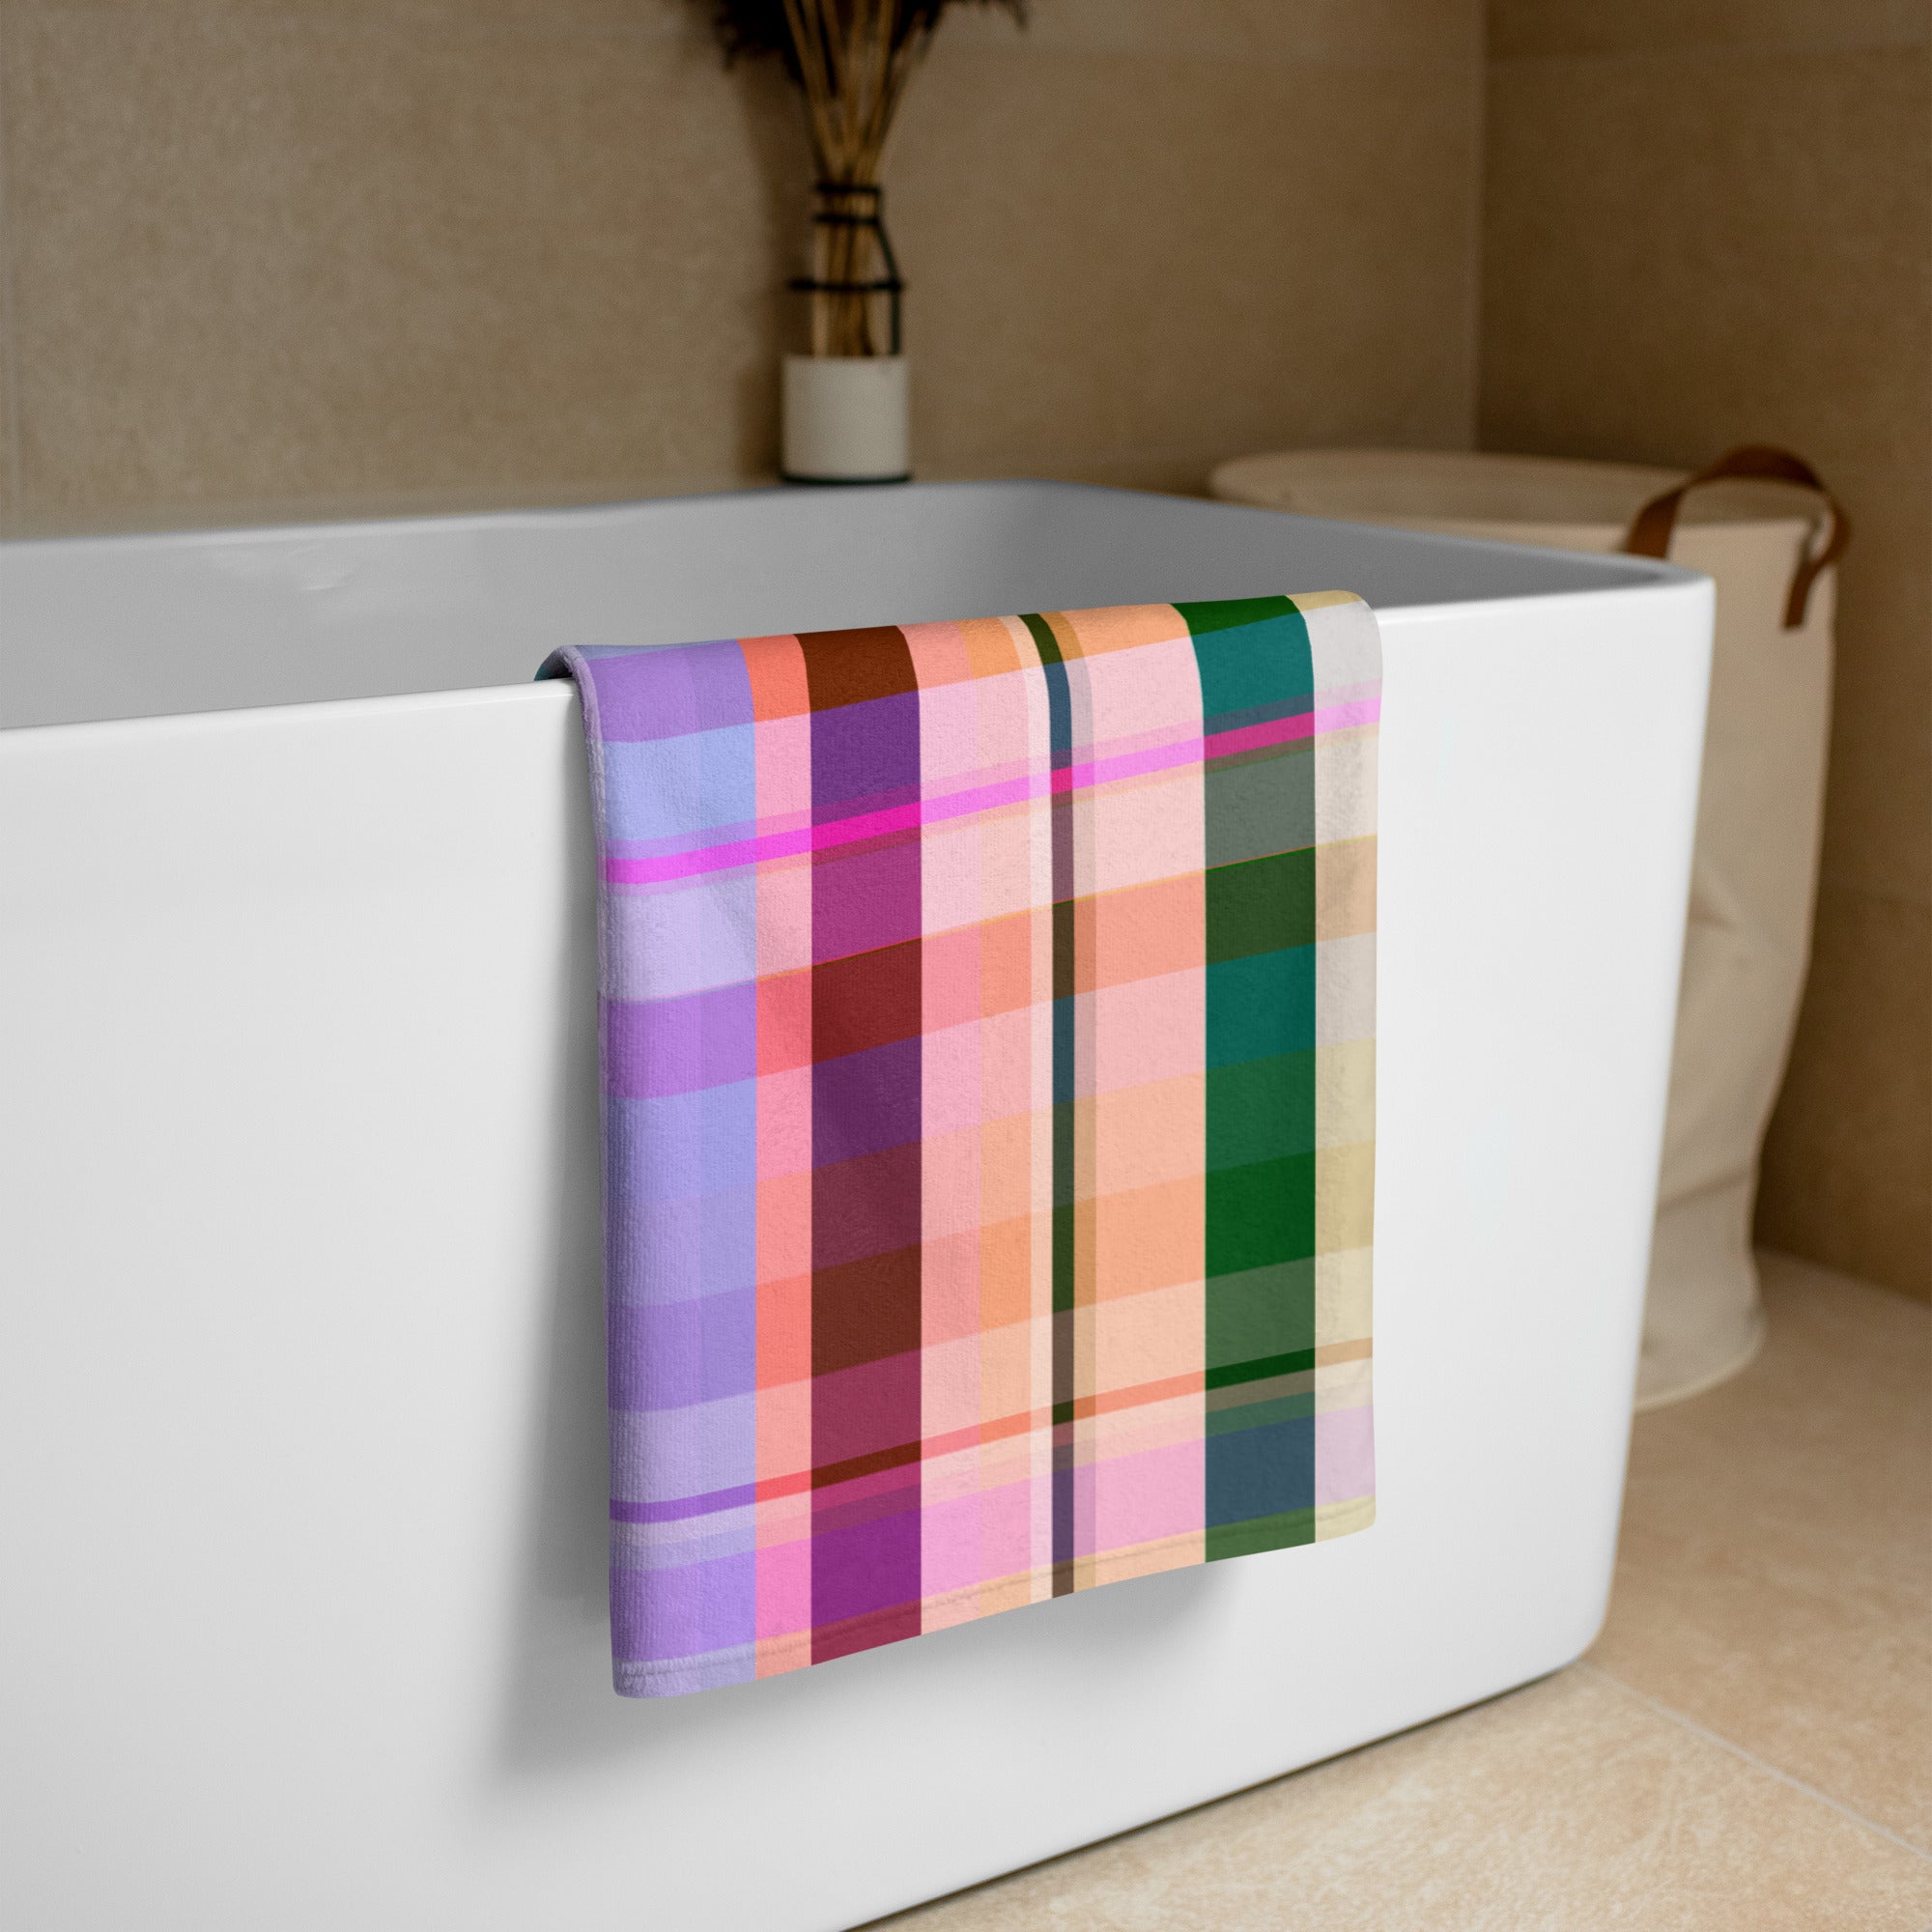 Ultra-soft bath towel in neon colors, adding a luminous touch to your daily bath routine.